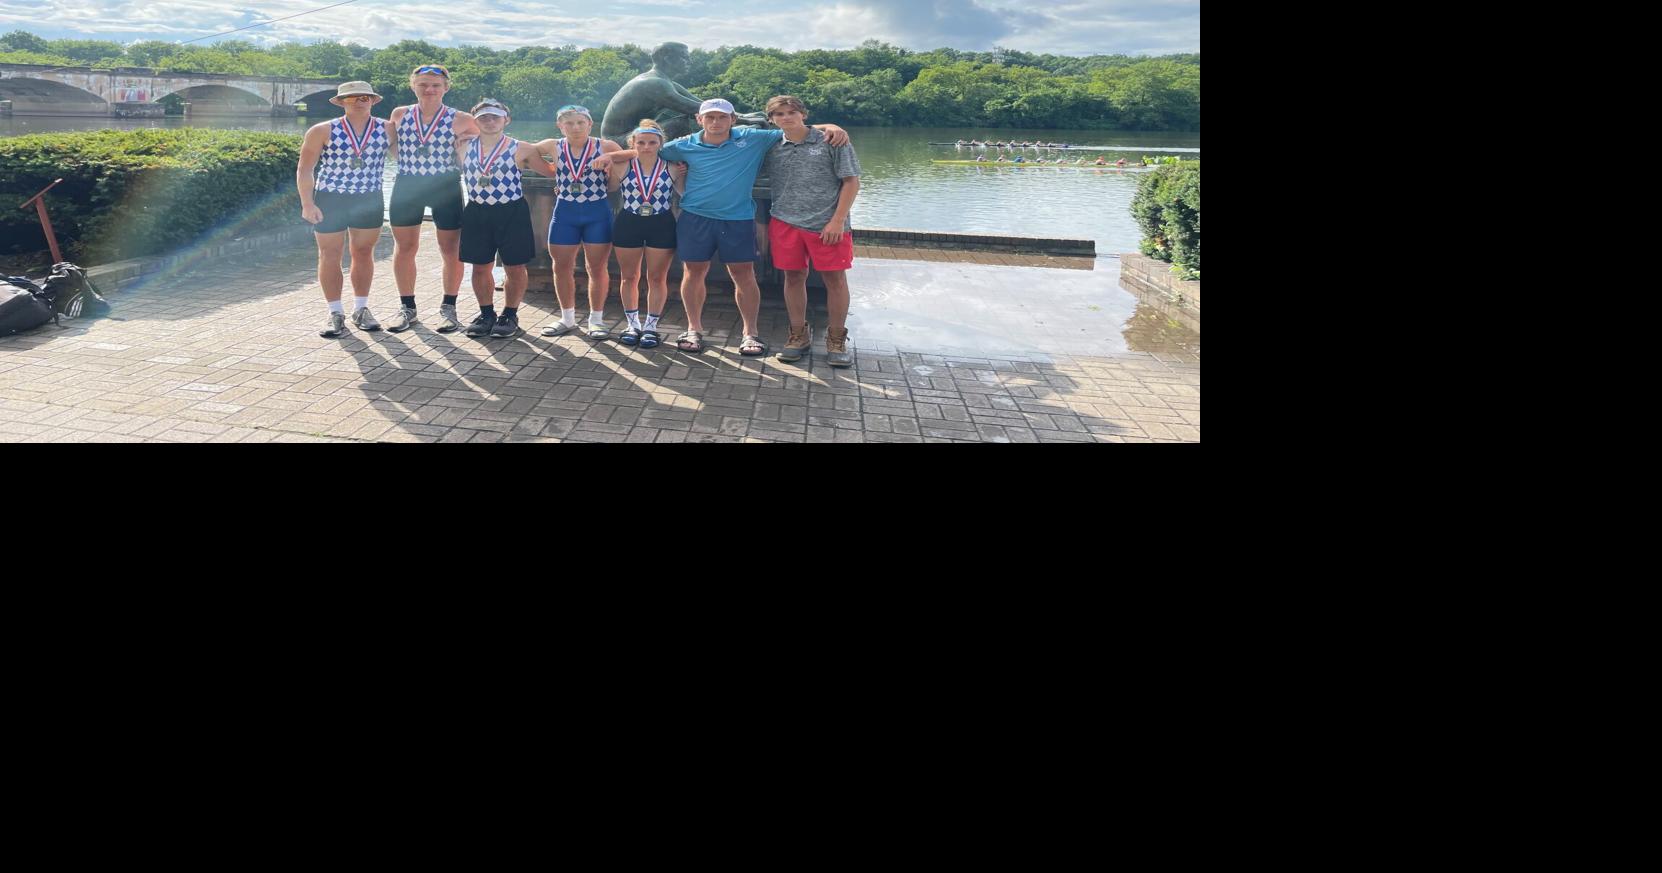 Buffalo Scholastic Rowing Club has successful trip to Independence Day